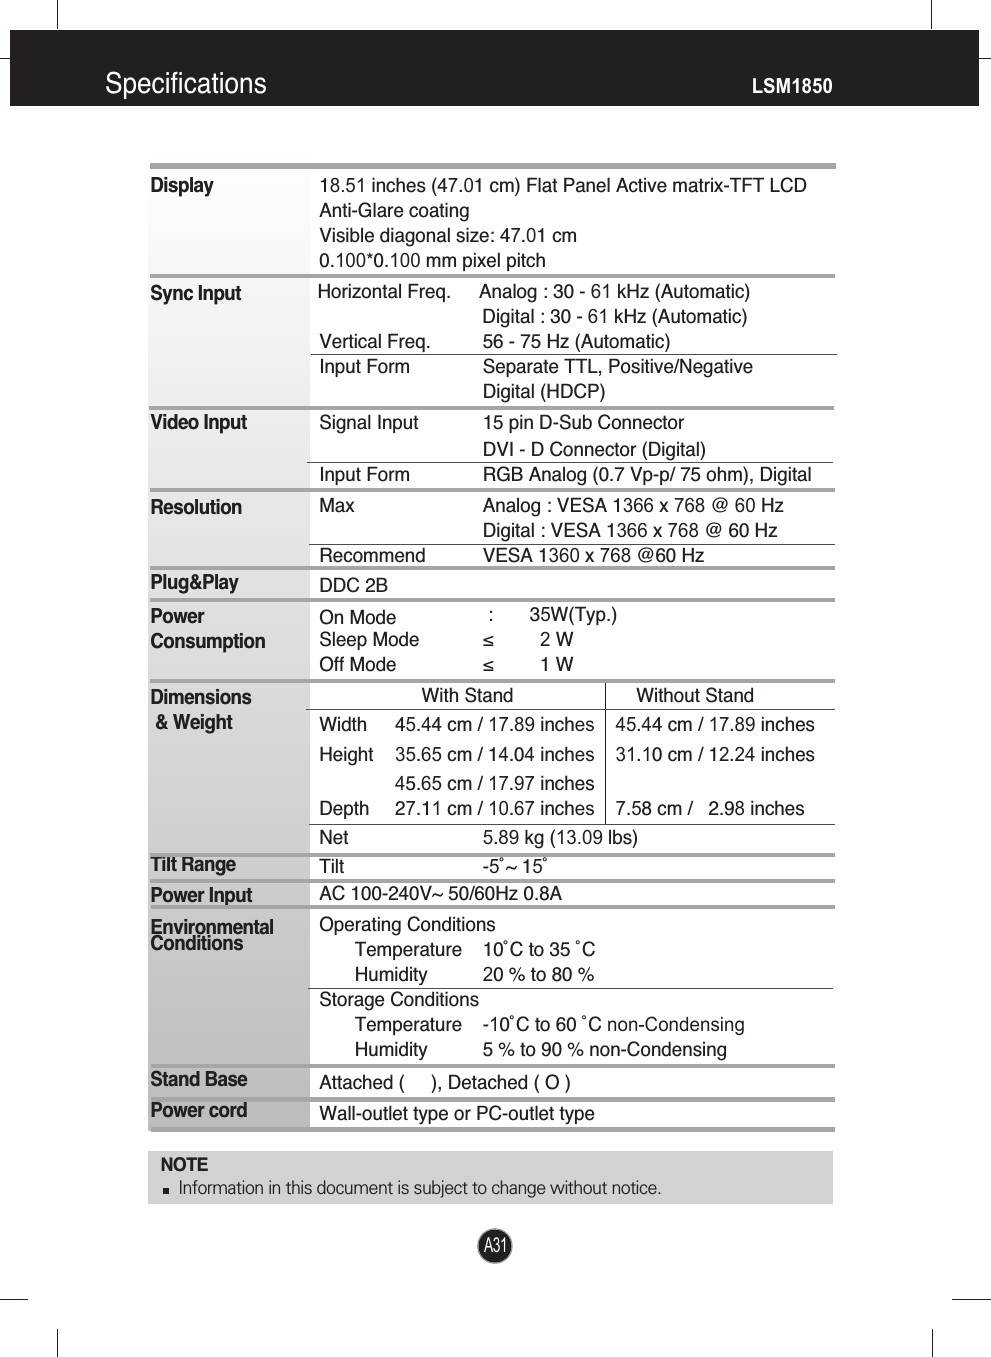 A31Specifications                                            LSM1850NOTEInformation in this document is subject to change without notice.DisplaySync InputVideo InputResolutionPlug&amp;PlayPowerConsumptionDimensions&amp; WeightTilt RangePower InputEnvironmentalConditionsStand BasePower cord 18.51 inches (47.01 cm) Flat Panel Active matrix-TFT LCD Anti-Glare coating Visible diagonal size: 47.01 cm0.100*0.100 mm pixel pitchHorizontal Freq. Analog : 30 - 61 kHz (Automatic)Digital : 30 - 61 kHz (Automatic)Vertical Freq. 56 - 75 Hz (Automatic)Input Form Separate TTL, Positive/NegativeDigital (HDCP)Signal Input 15 pin D-Sub ConnectorDVI - D Connector (Digital)Input Form RGB Analog (0.7 Vp-p/ 75 ohm), DigitalMax Analog : VESA 1366 x 768 @ 60 HzDigital : VESA 1366 x 768 @ 60 HzRecommend VESA 1360 x 768 @60 HzDDC 2BOn Mode : 35W(Typ.)Sleep Mode ≤         2 WOff Mode ≤         1 WWith Stand Without StandWidth 45.44 cm / 17.89 inches    45.44 cm / 17.89 inchesHeight 35.65 cm / 14.04 inches    31.10 cm / 12.24 inches45.65 cm / 17.97 inchesDepth 27.11 cm / 10.67 inches    7.58 cm /   2.98 inchesNet 5.89 kg (13.09 lbs)Tilt -5˚~ 15˚AC 100-240V~ 50/60Hz 0.8A Operating ConditionsTemperature 10˚C to 35 ˚CHumidity 20 % to 80 % Storage ConditionsTemperature -10˚C to 60 ˚C non-CondensingHumidity 5 % to 90 % non-CondensingAttached (     ), Detached ( O )Wall-outlet type or PC-outlet type